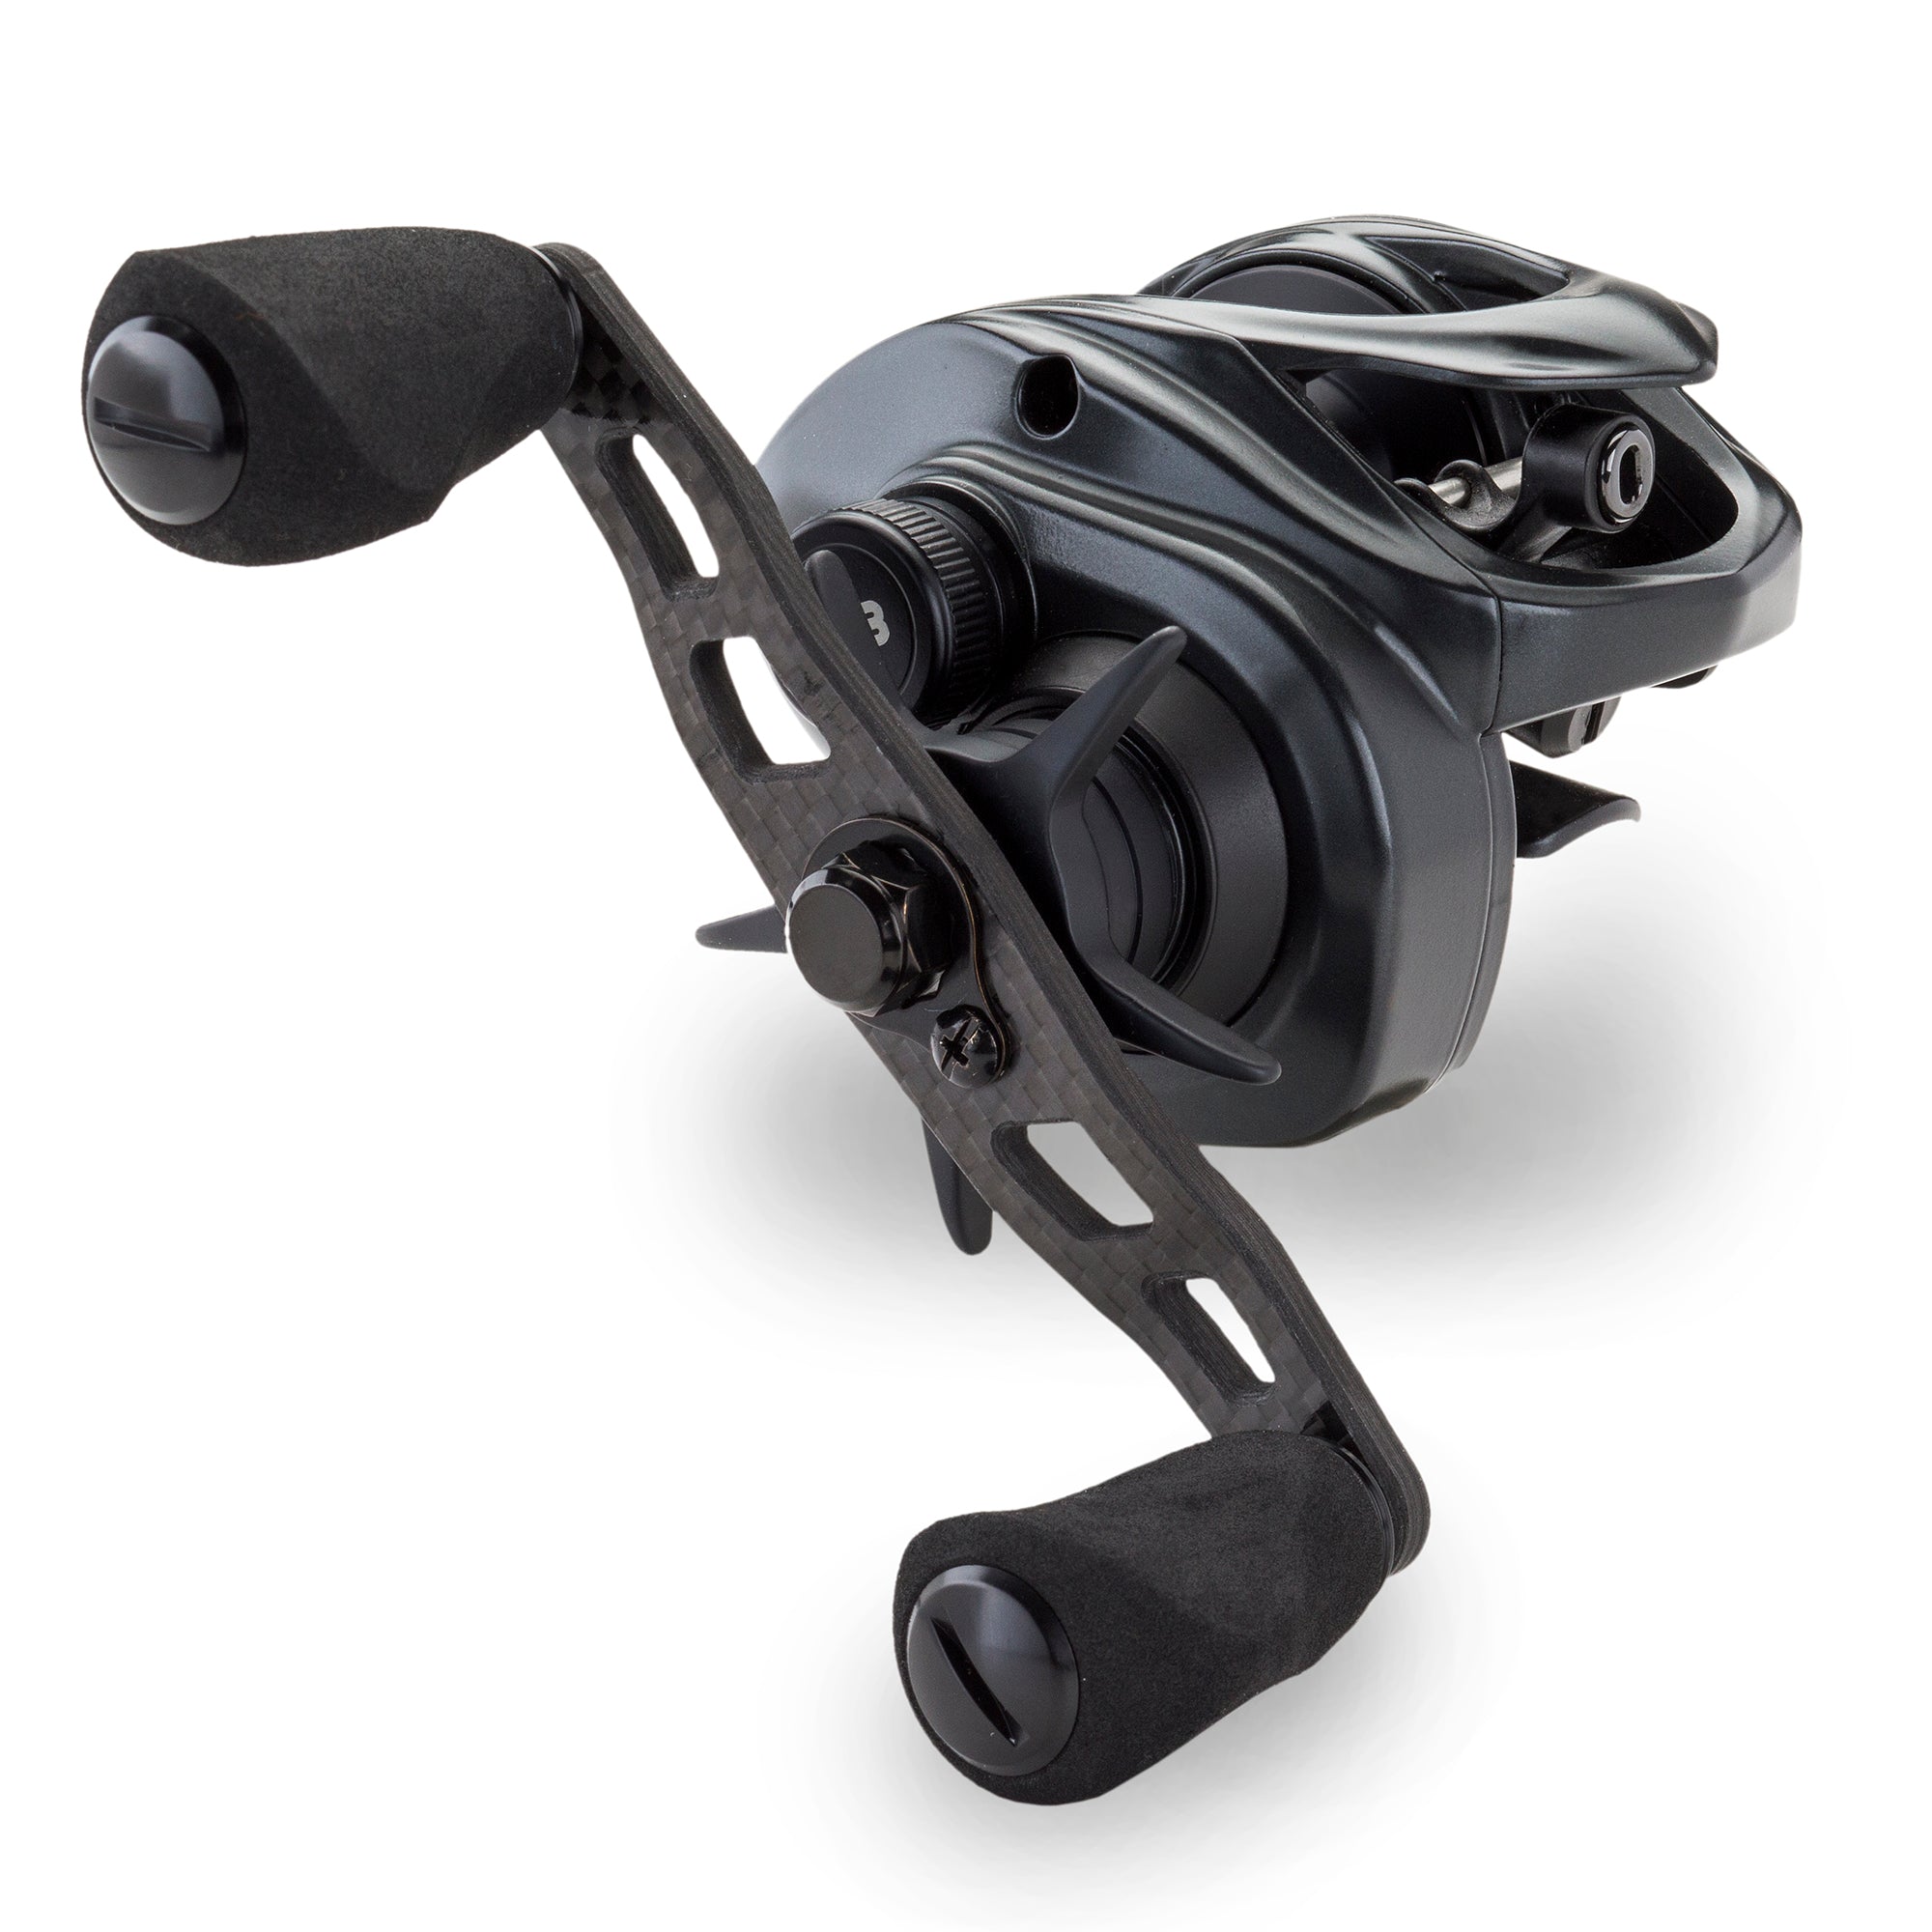 Kistler Series 1 Casting Reel Product Review #kistlerreels #kistlerseries1  #kistlerreelreview